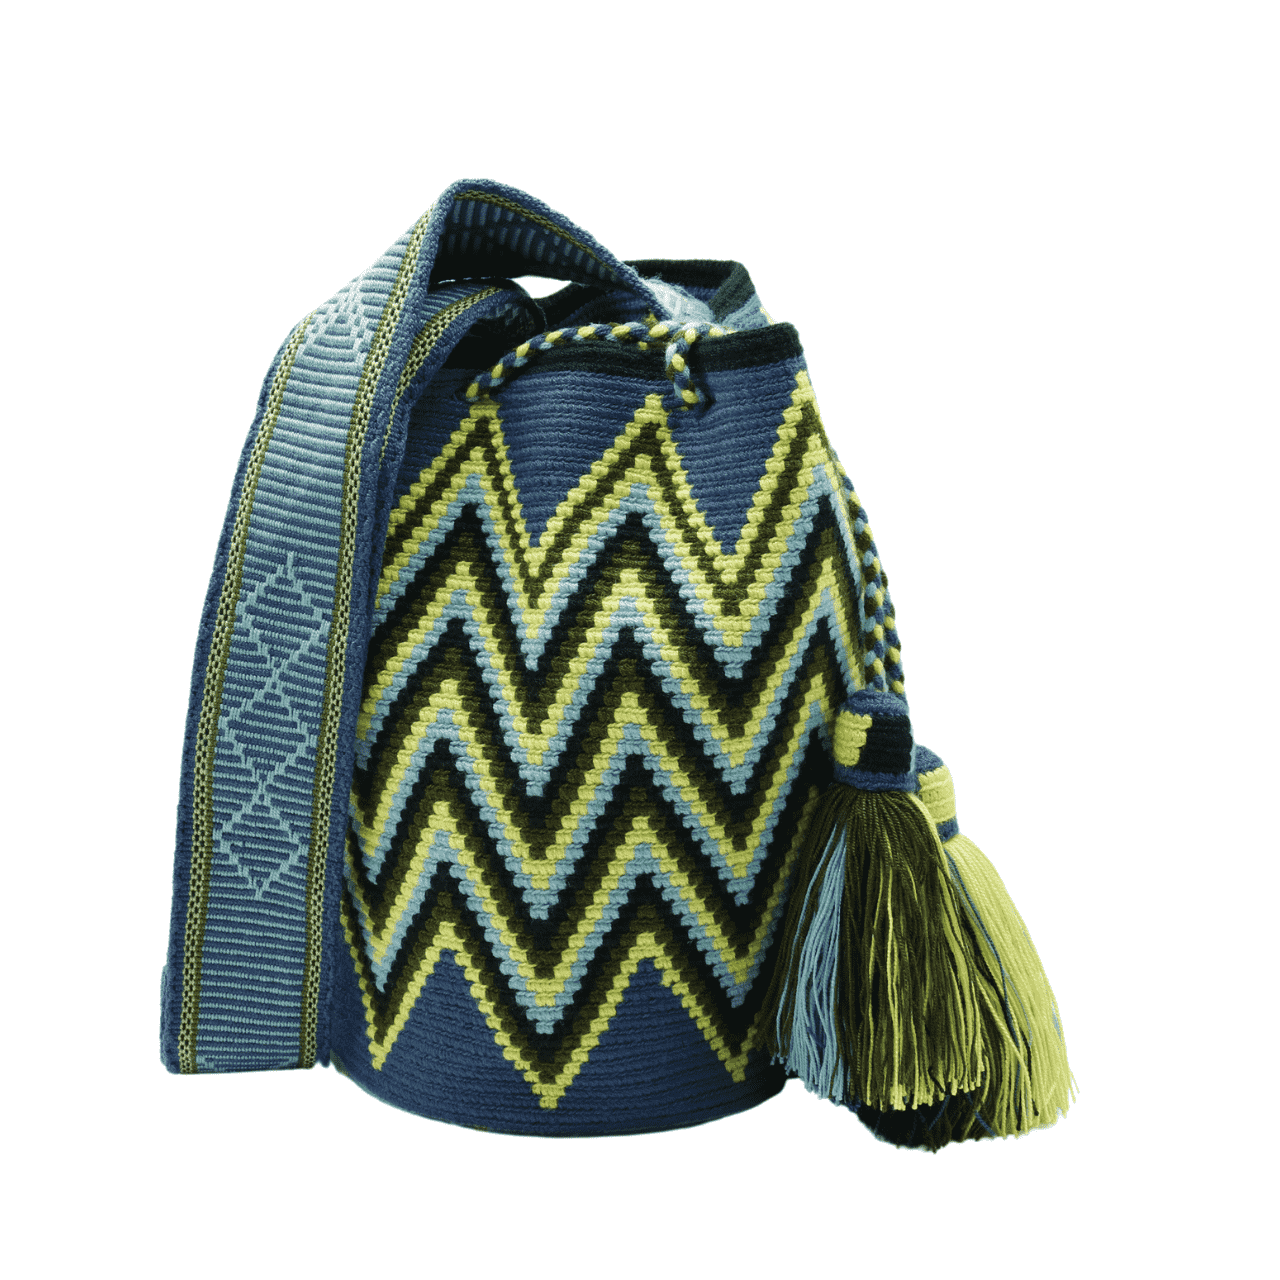 Hattie Wayuu Bag - Handmade in Colombia, showcasing a beautiful blend of greens and blues, exuding a vibrant and captivating allure.